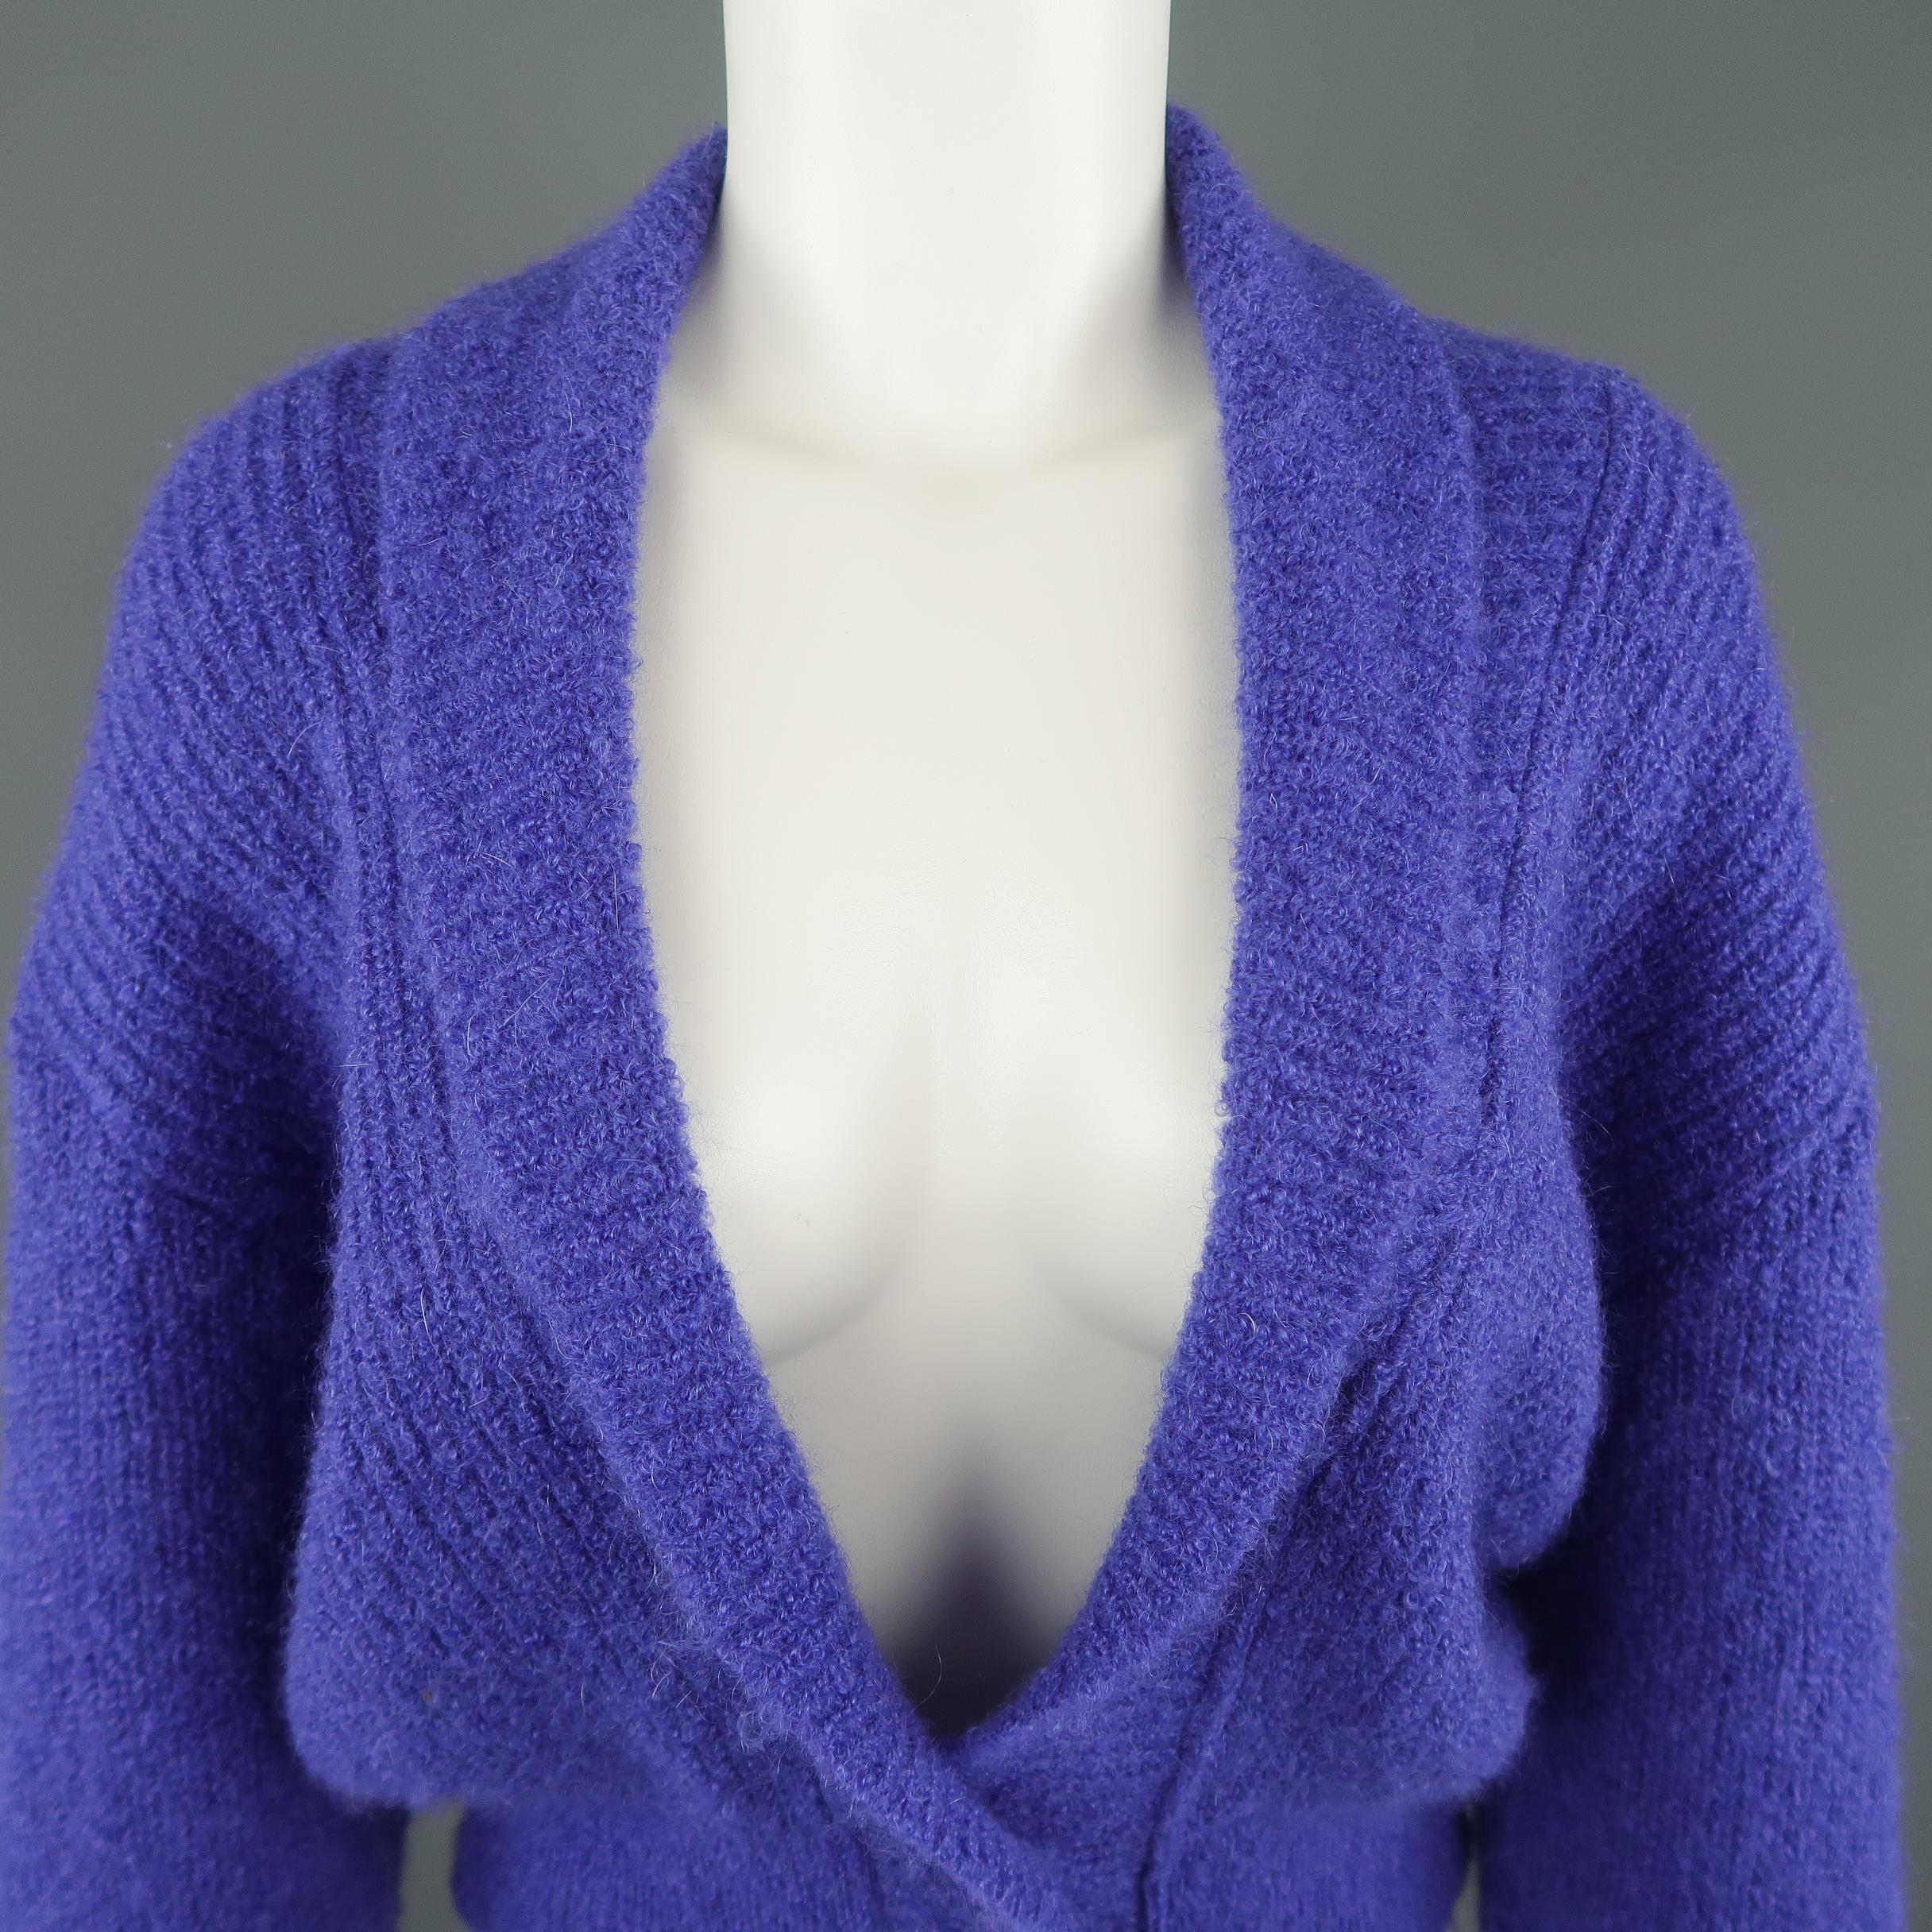 Vintage JAEGER cardigan comes in a fuzzy purple knit with a deep V shawl collar neckline, drop shoulder sleeves, and cropped hem with two button closure. Made in Great Britain.
 
Excellent Pre-Owned Condition.
Marked: M
 
Measurements:
 
Shoulder: